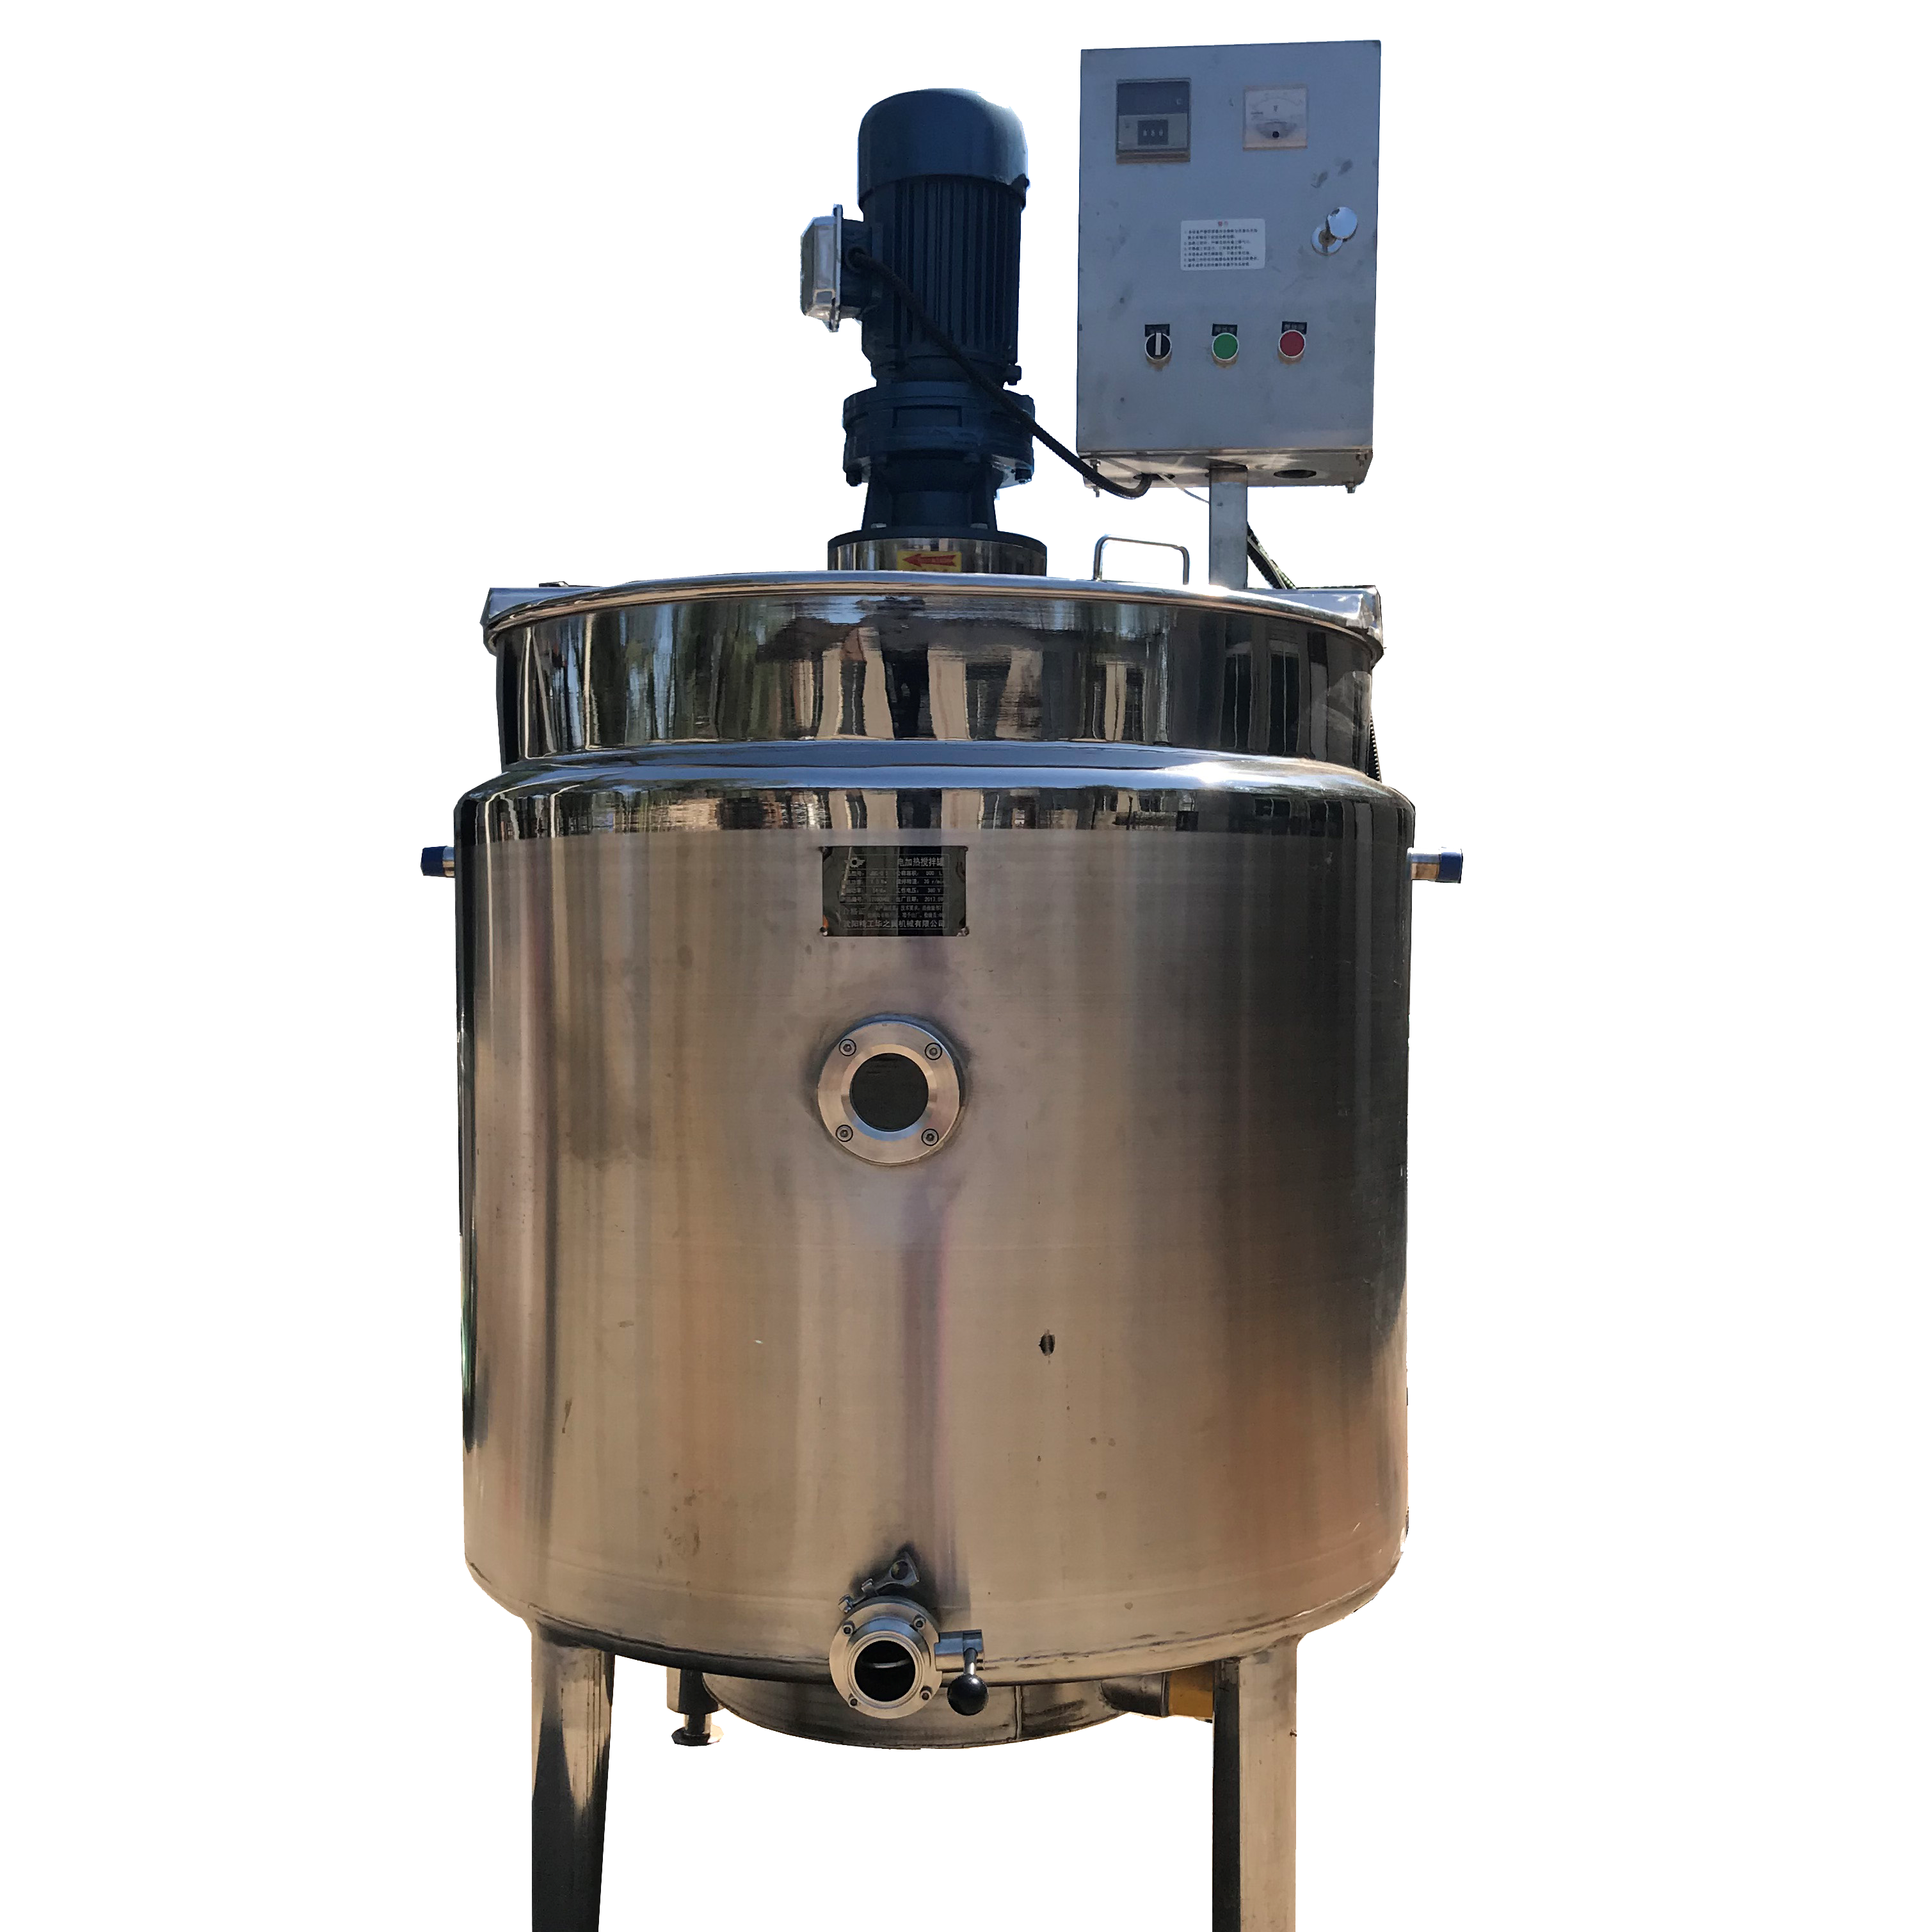 Liquid mixing tank can be customized for heating